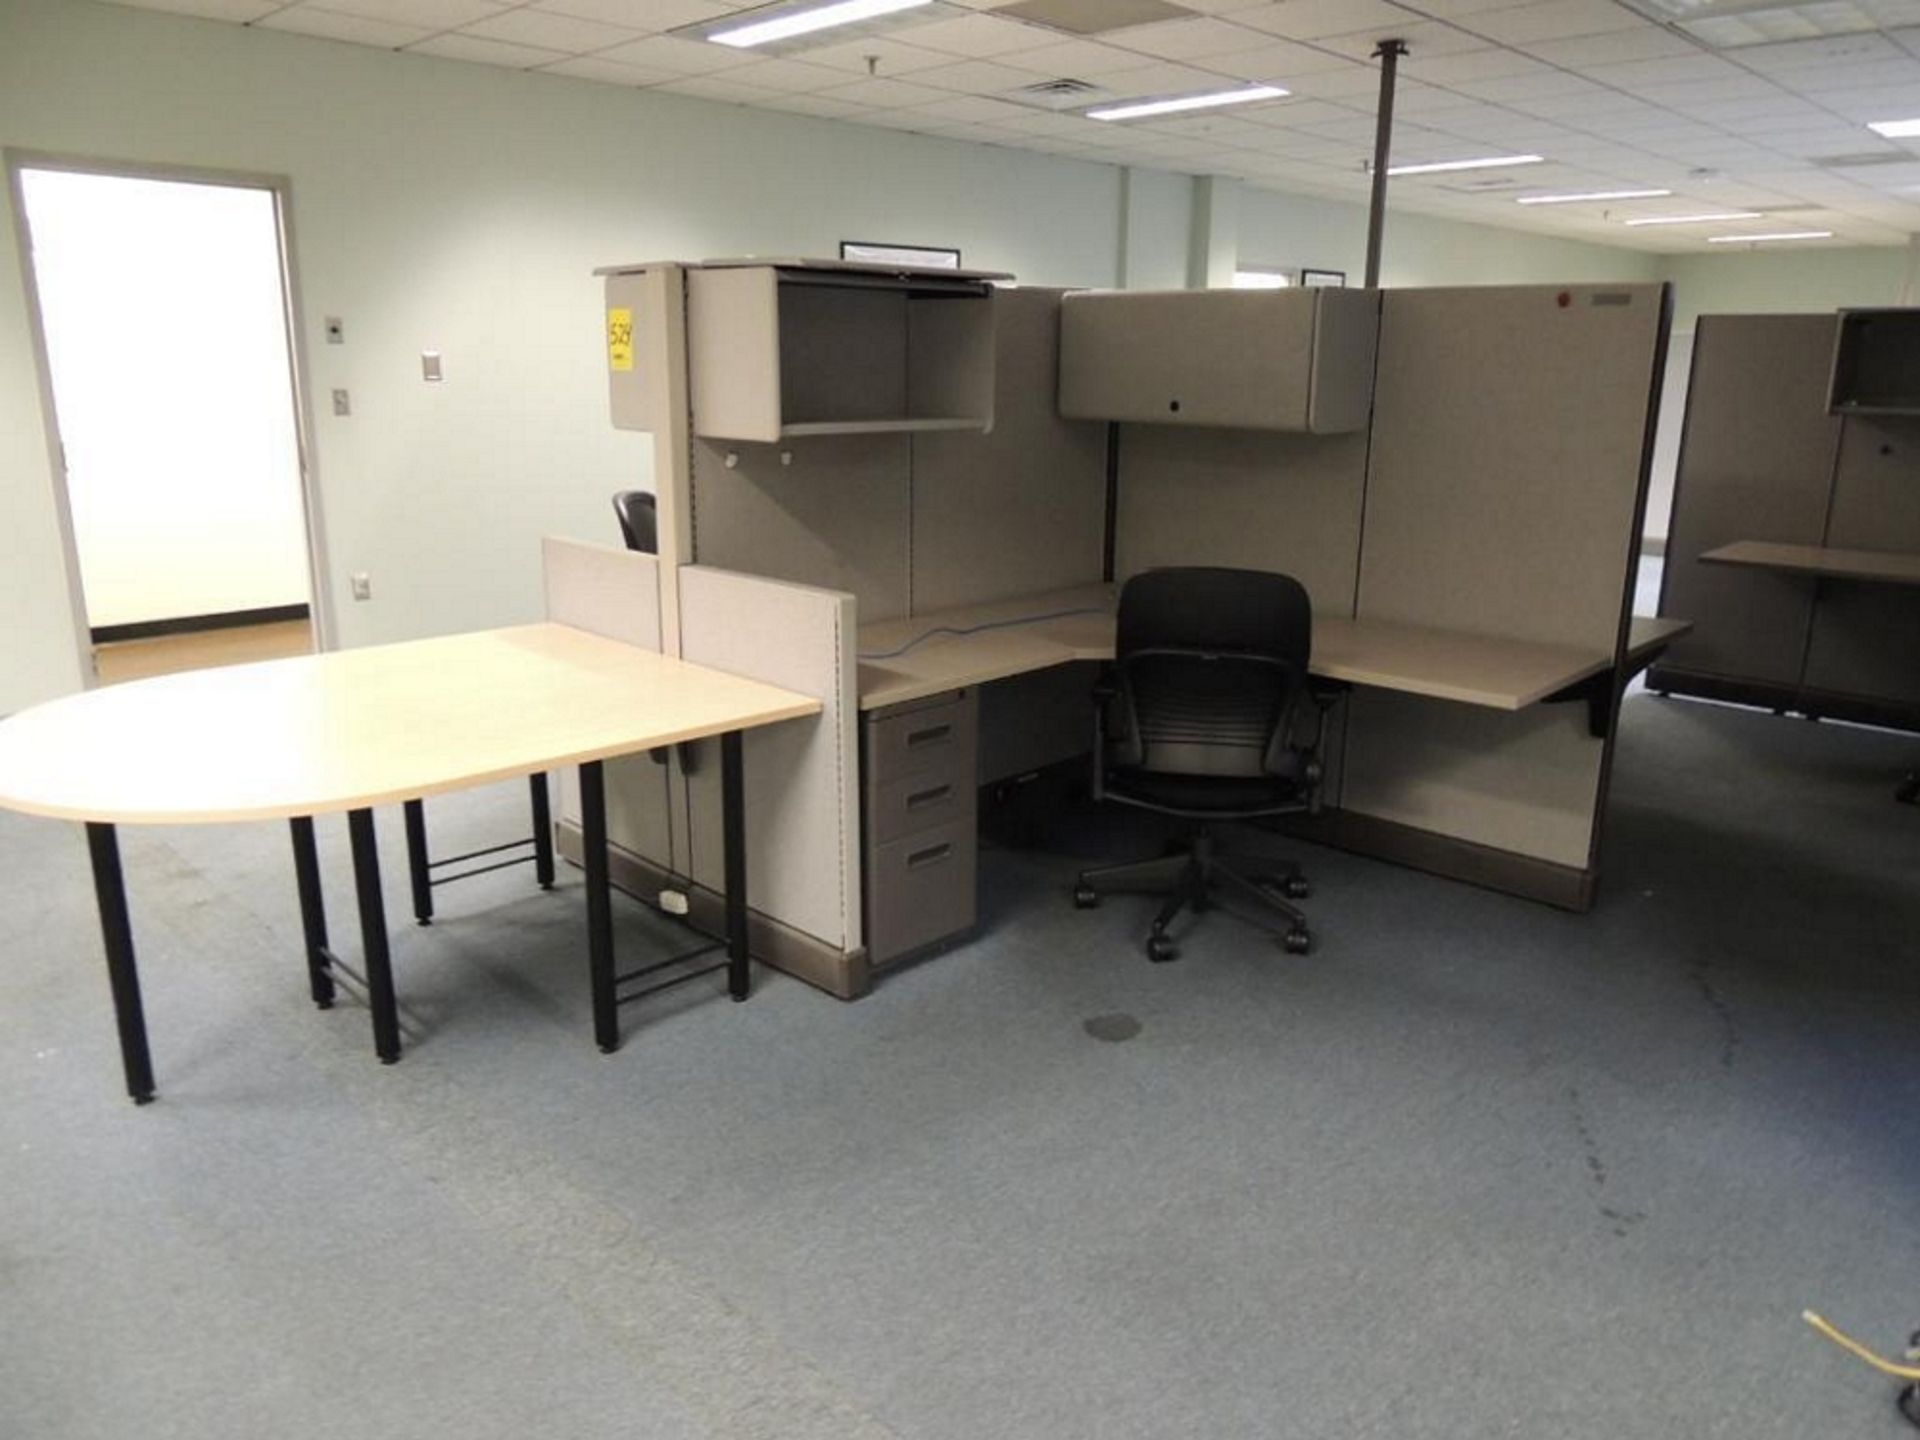 LOT: (2) 4 Person Cubicle and (1) Single Person Cubicle, (11) File Cabinets, (2) Book Racks, Office